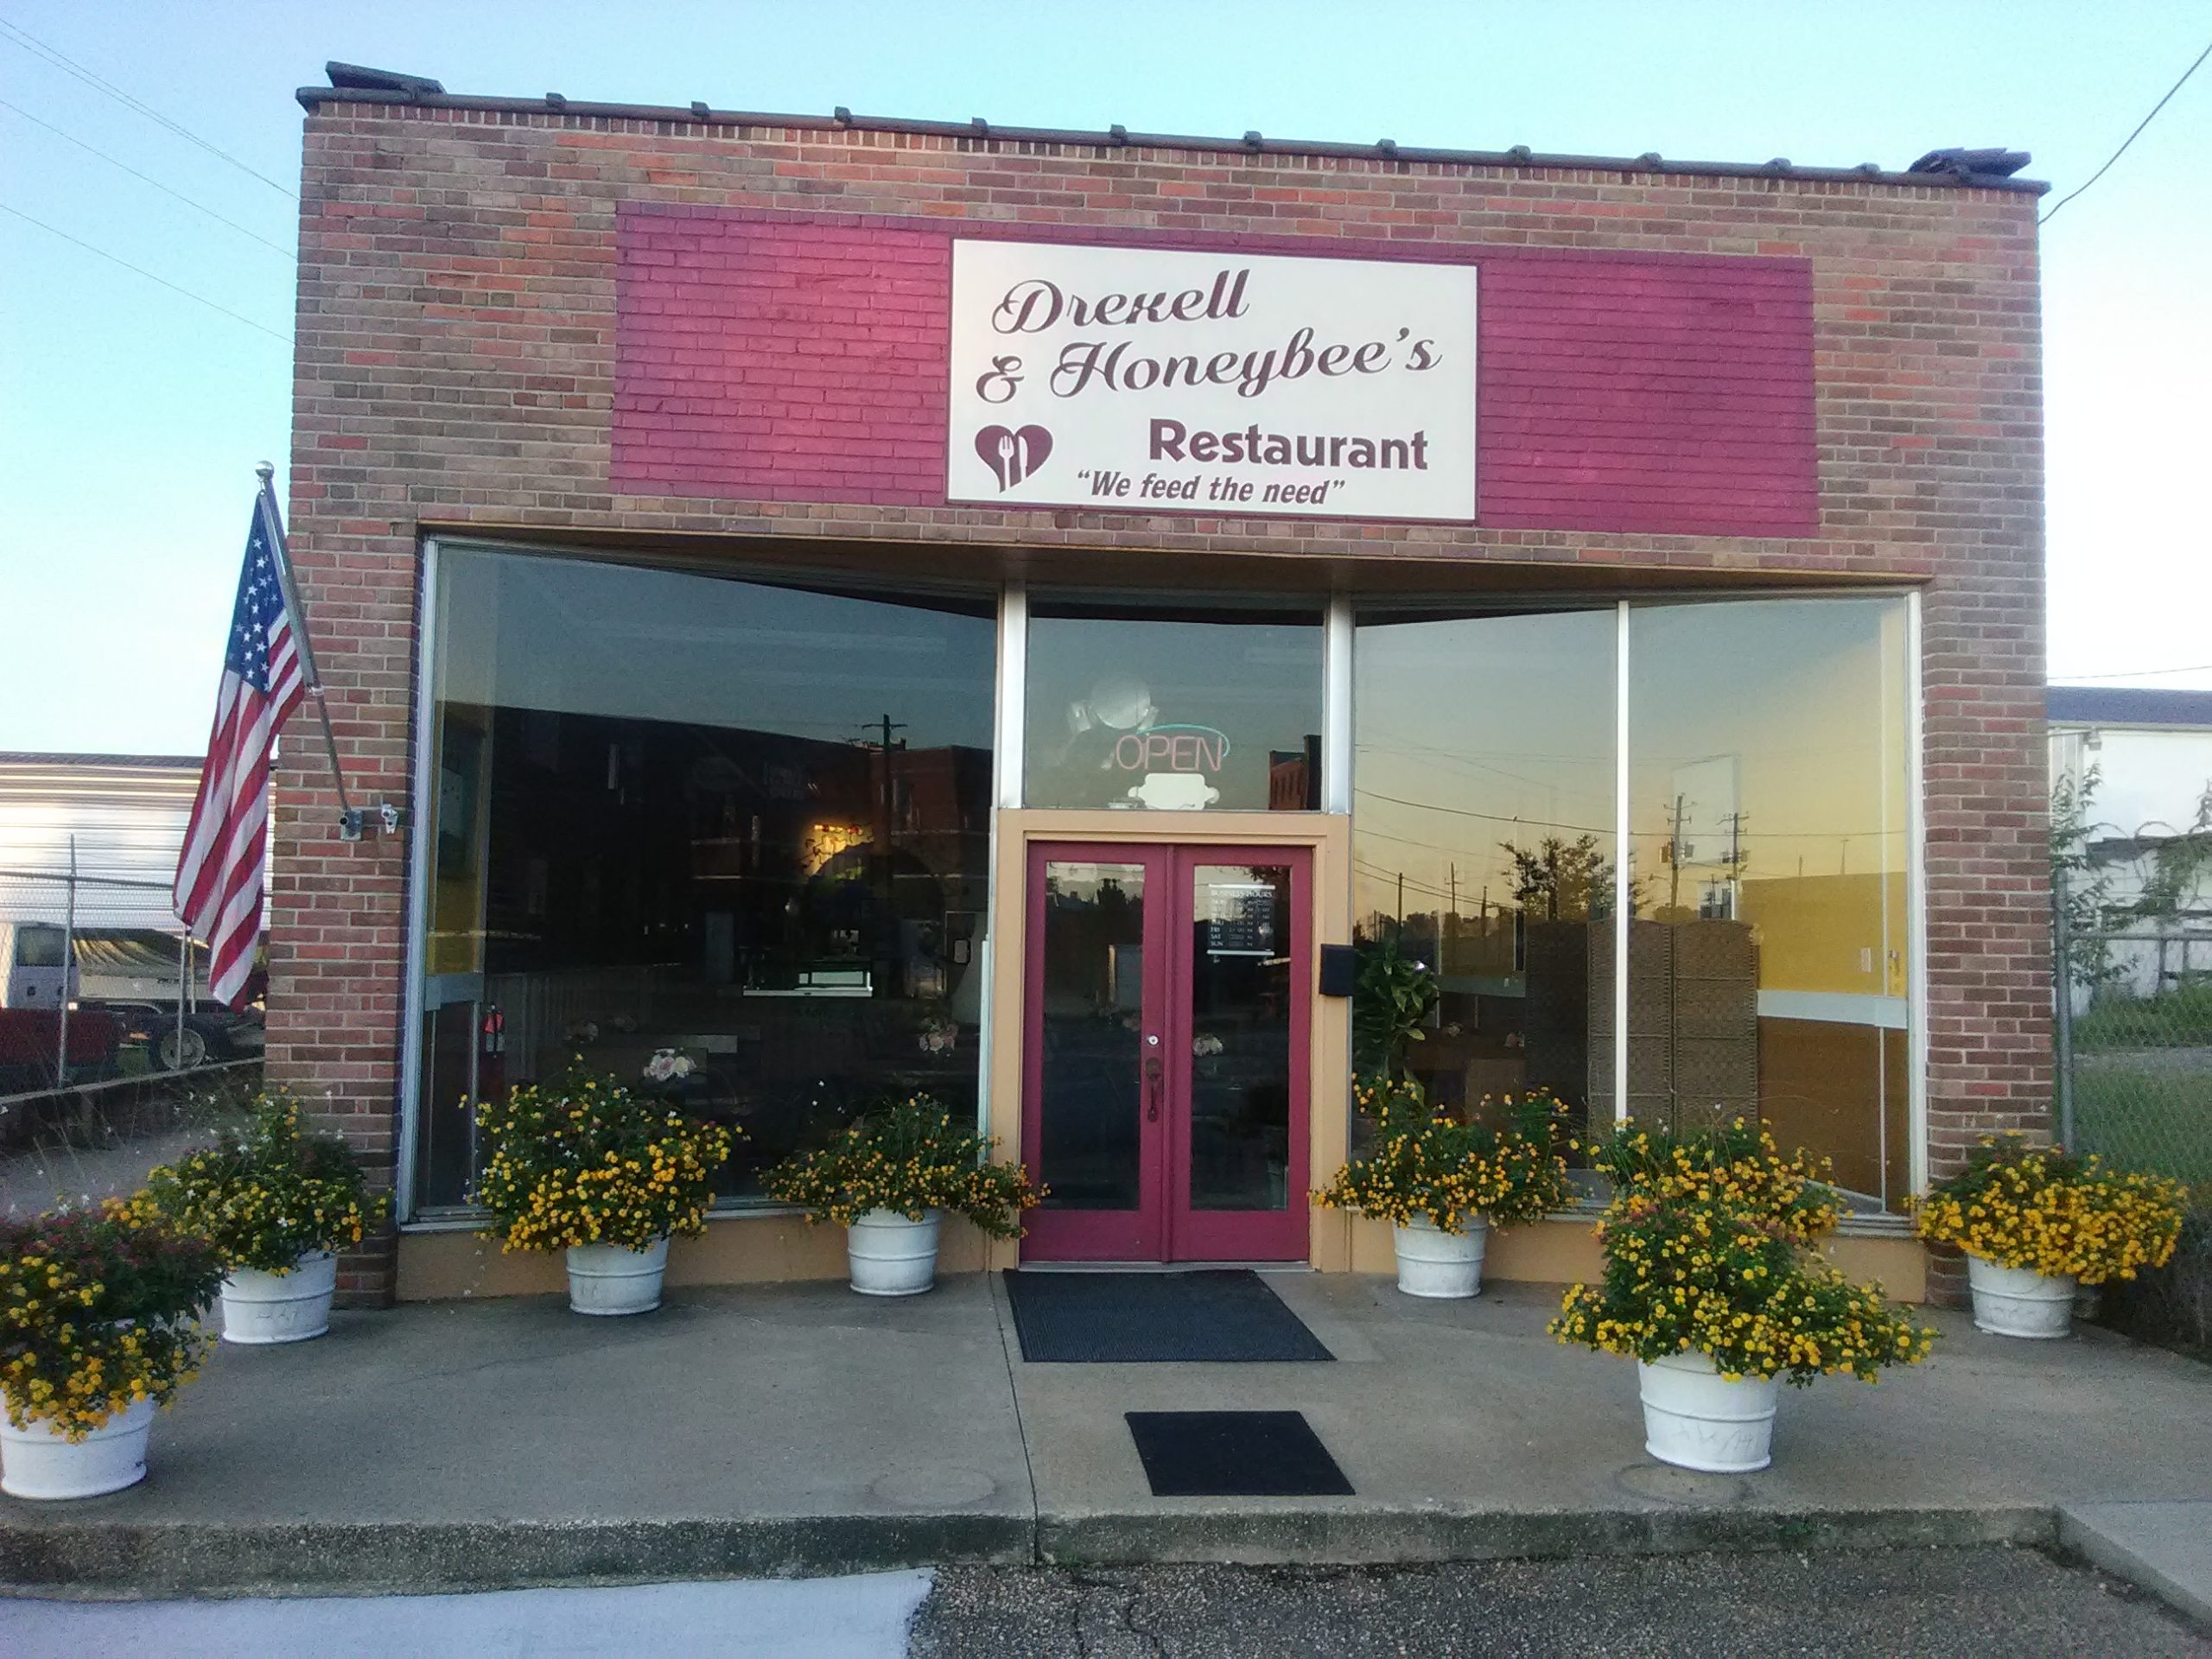 Donation Only Restaurant in Alabama doesn't charge customers Home - Drexell  and Honeybees Drexell and Honeybees